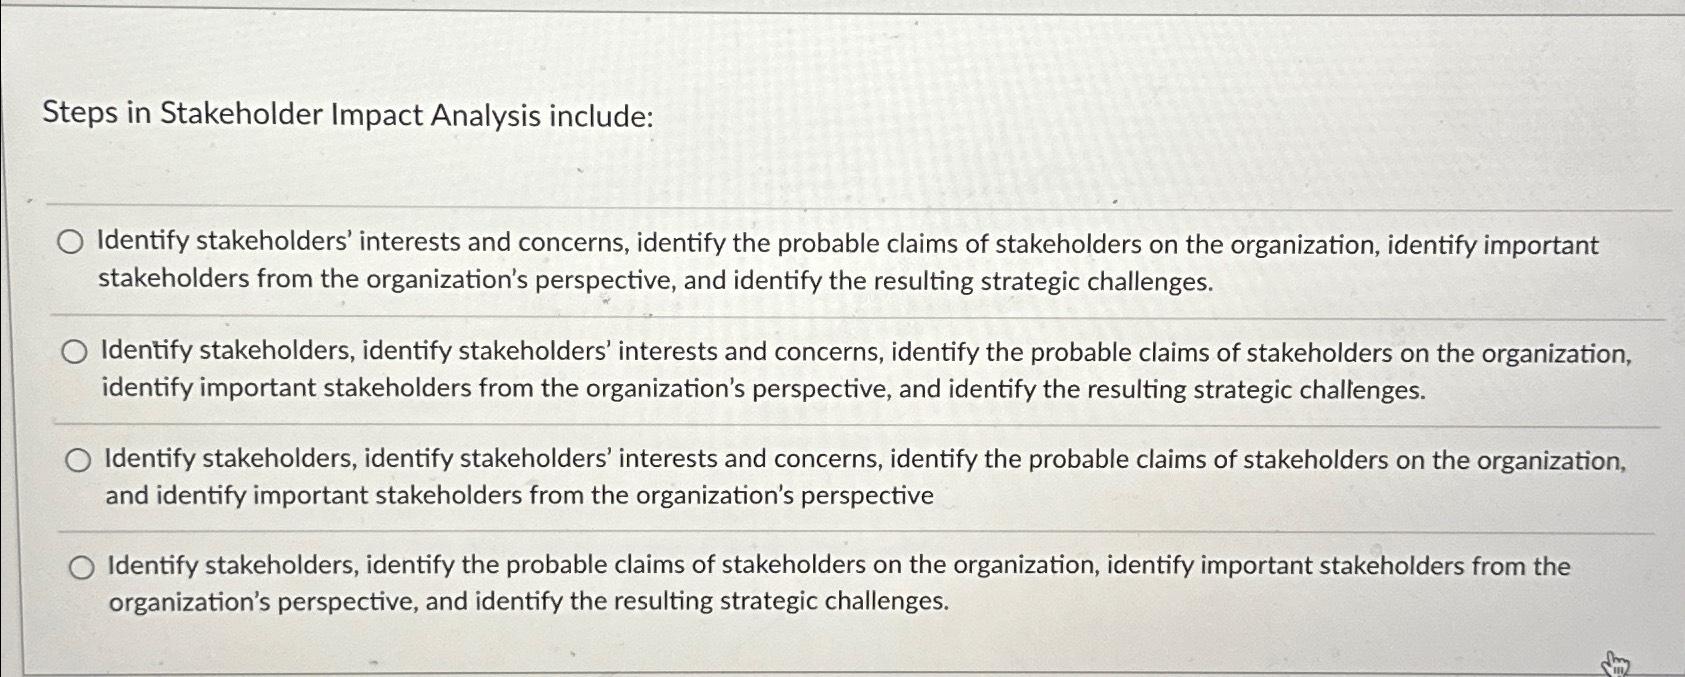 Steps in Stakeholder Impact Analysis include: Identify stakeholders' interests and concerns, identify the